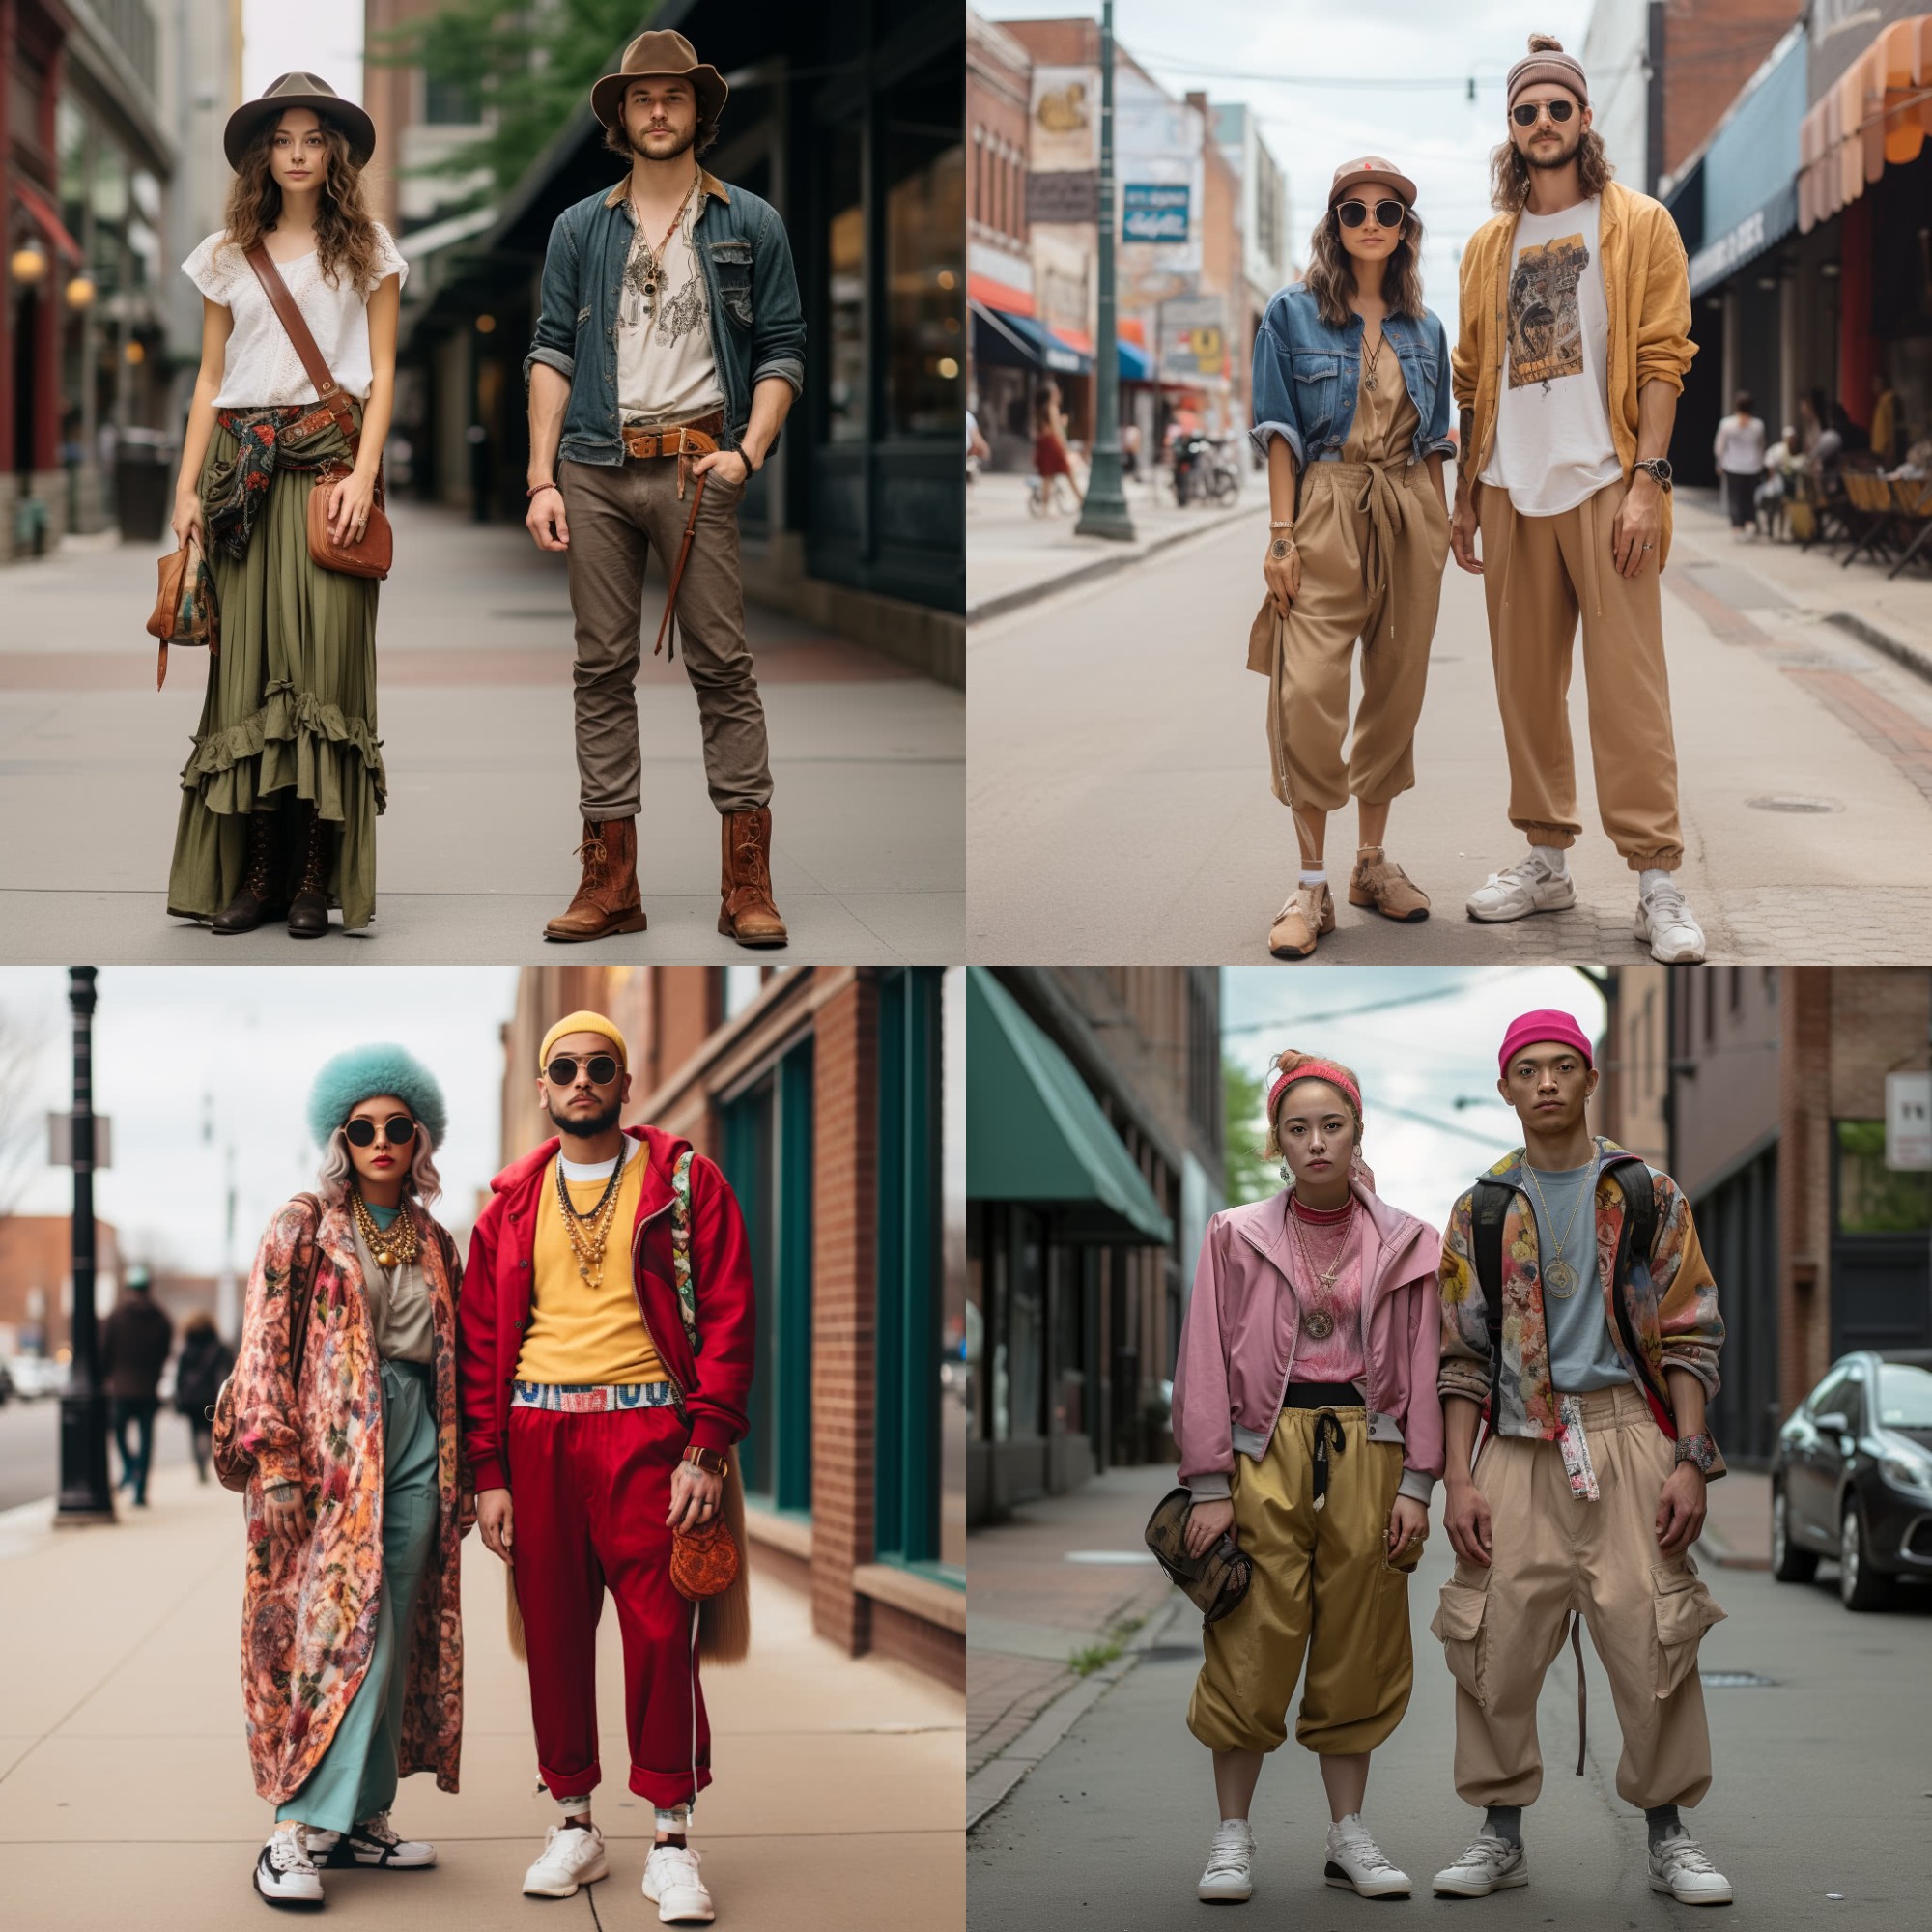 AI curated images of the average fashion style of individuals in Ohio